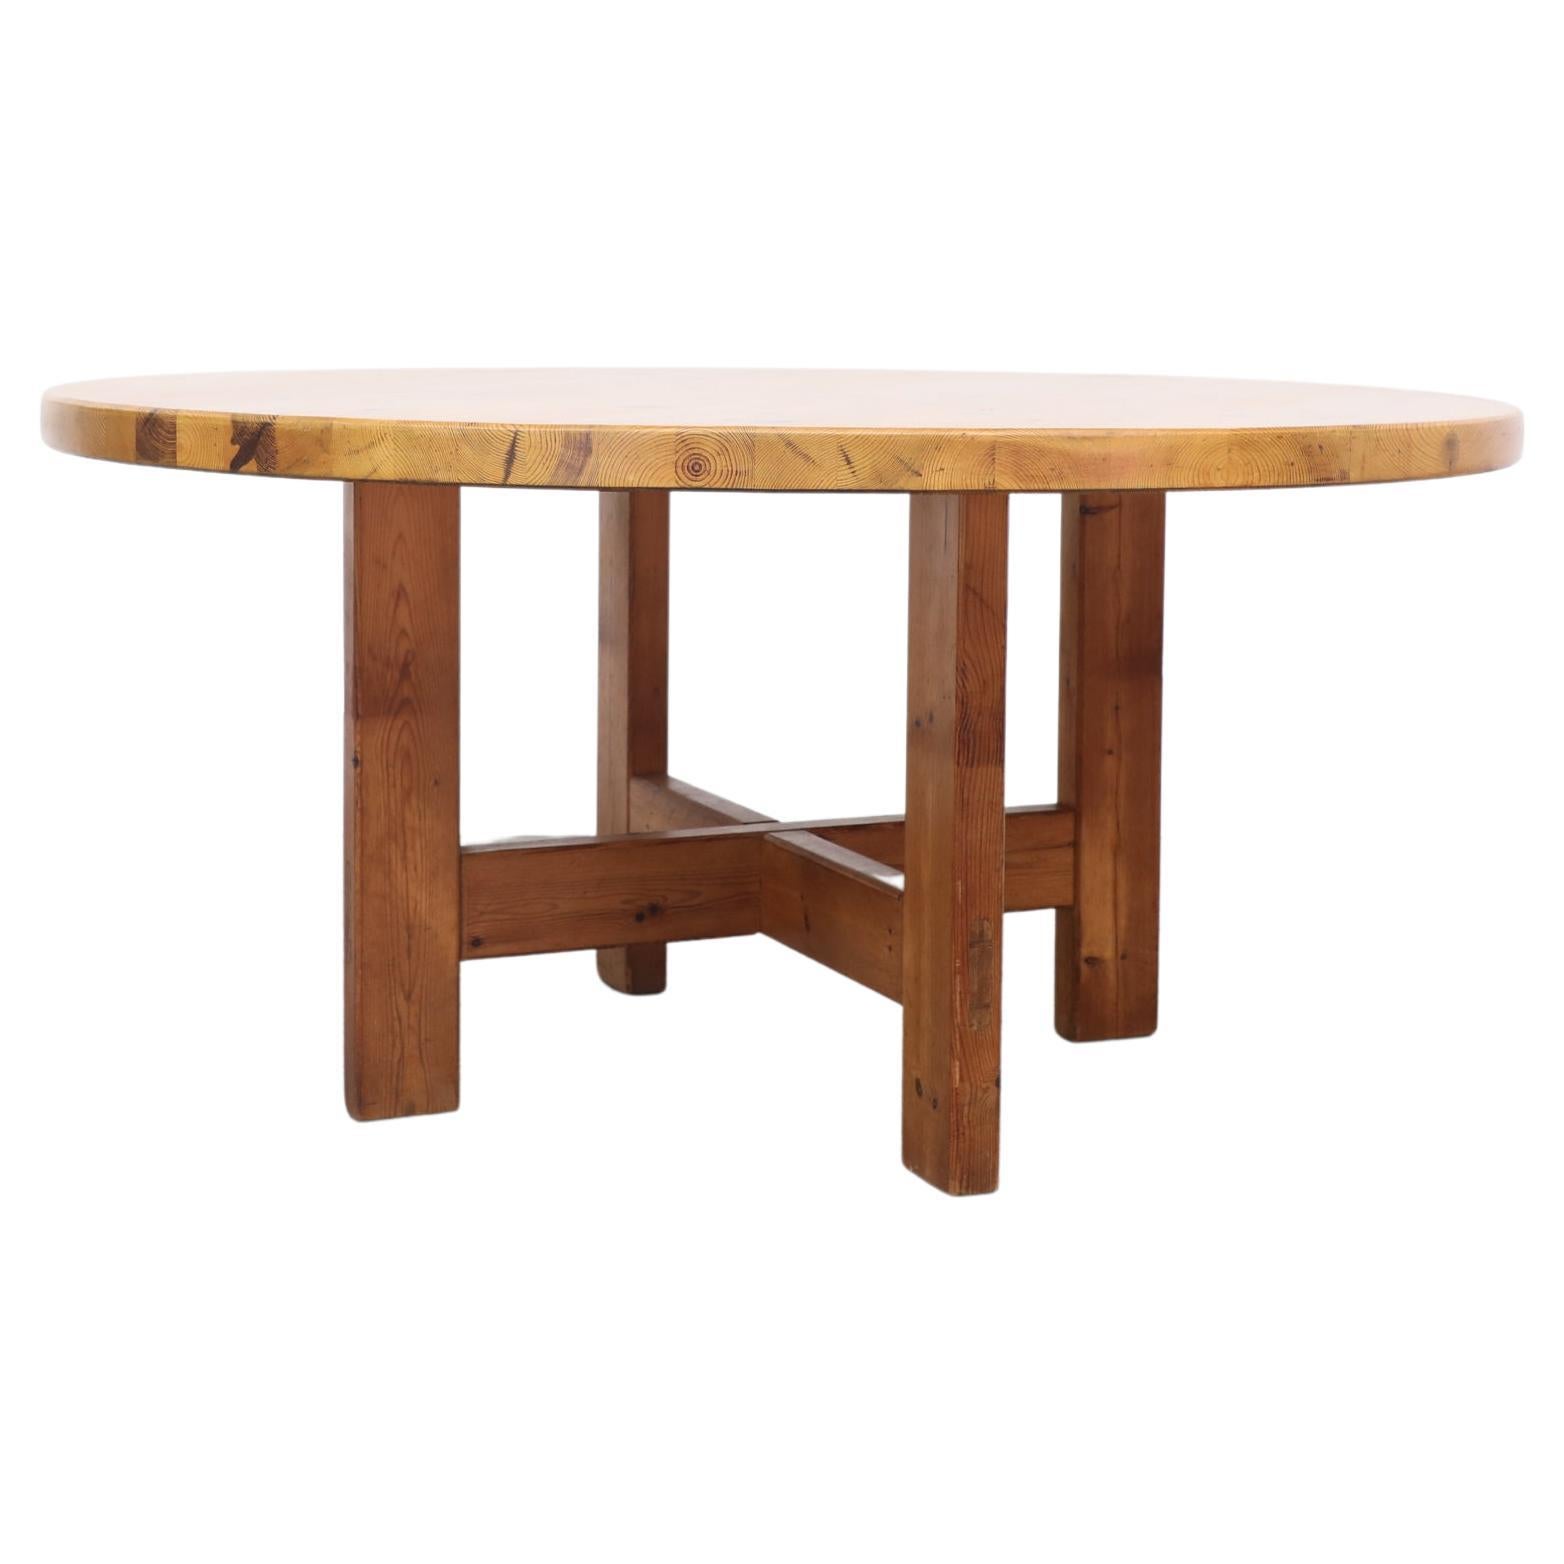 Roland Wilhelmsson 'RW152' Dining Table for Karl Andersson & Söner, Sweden 1950 For Sale